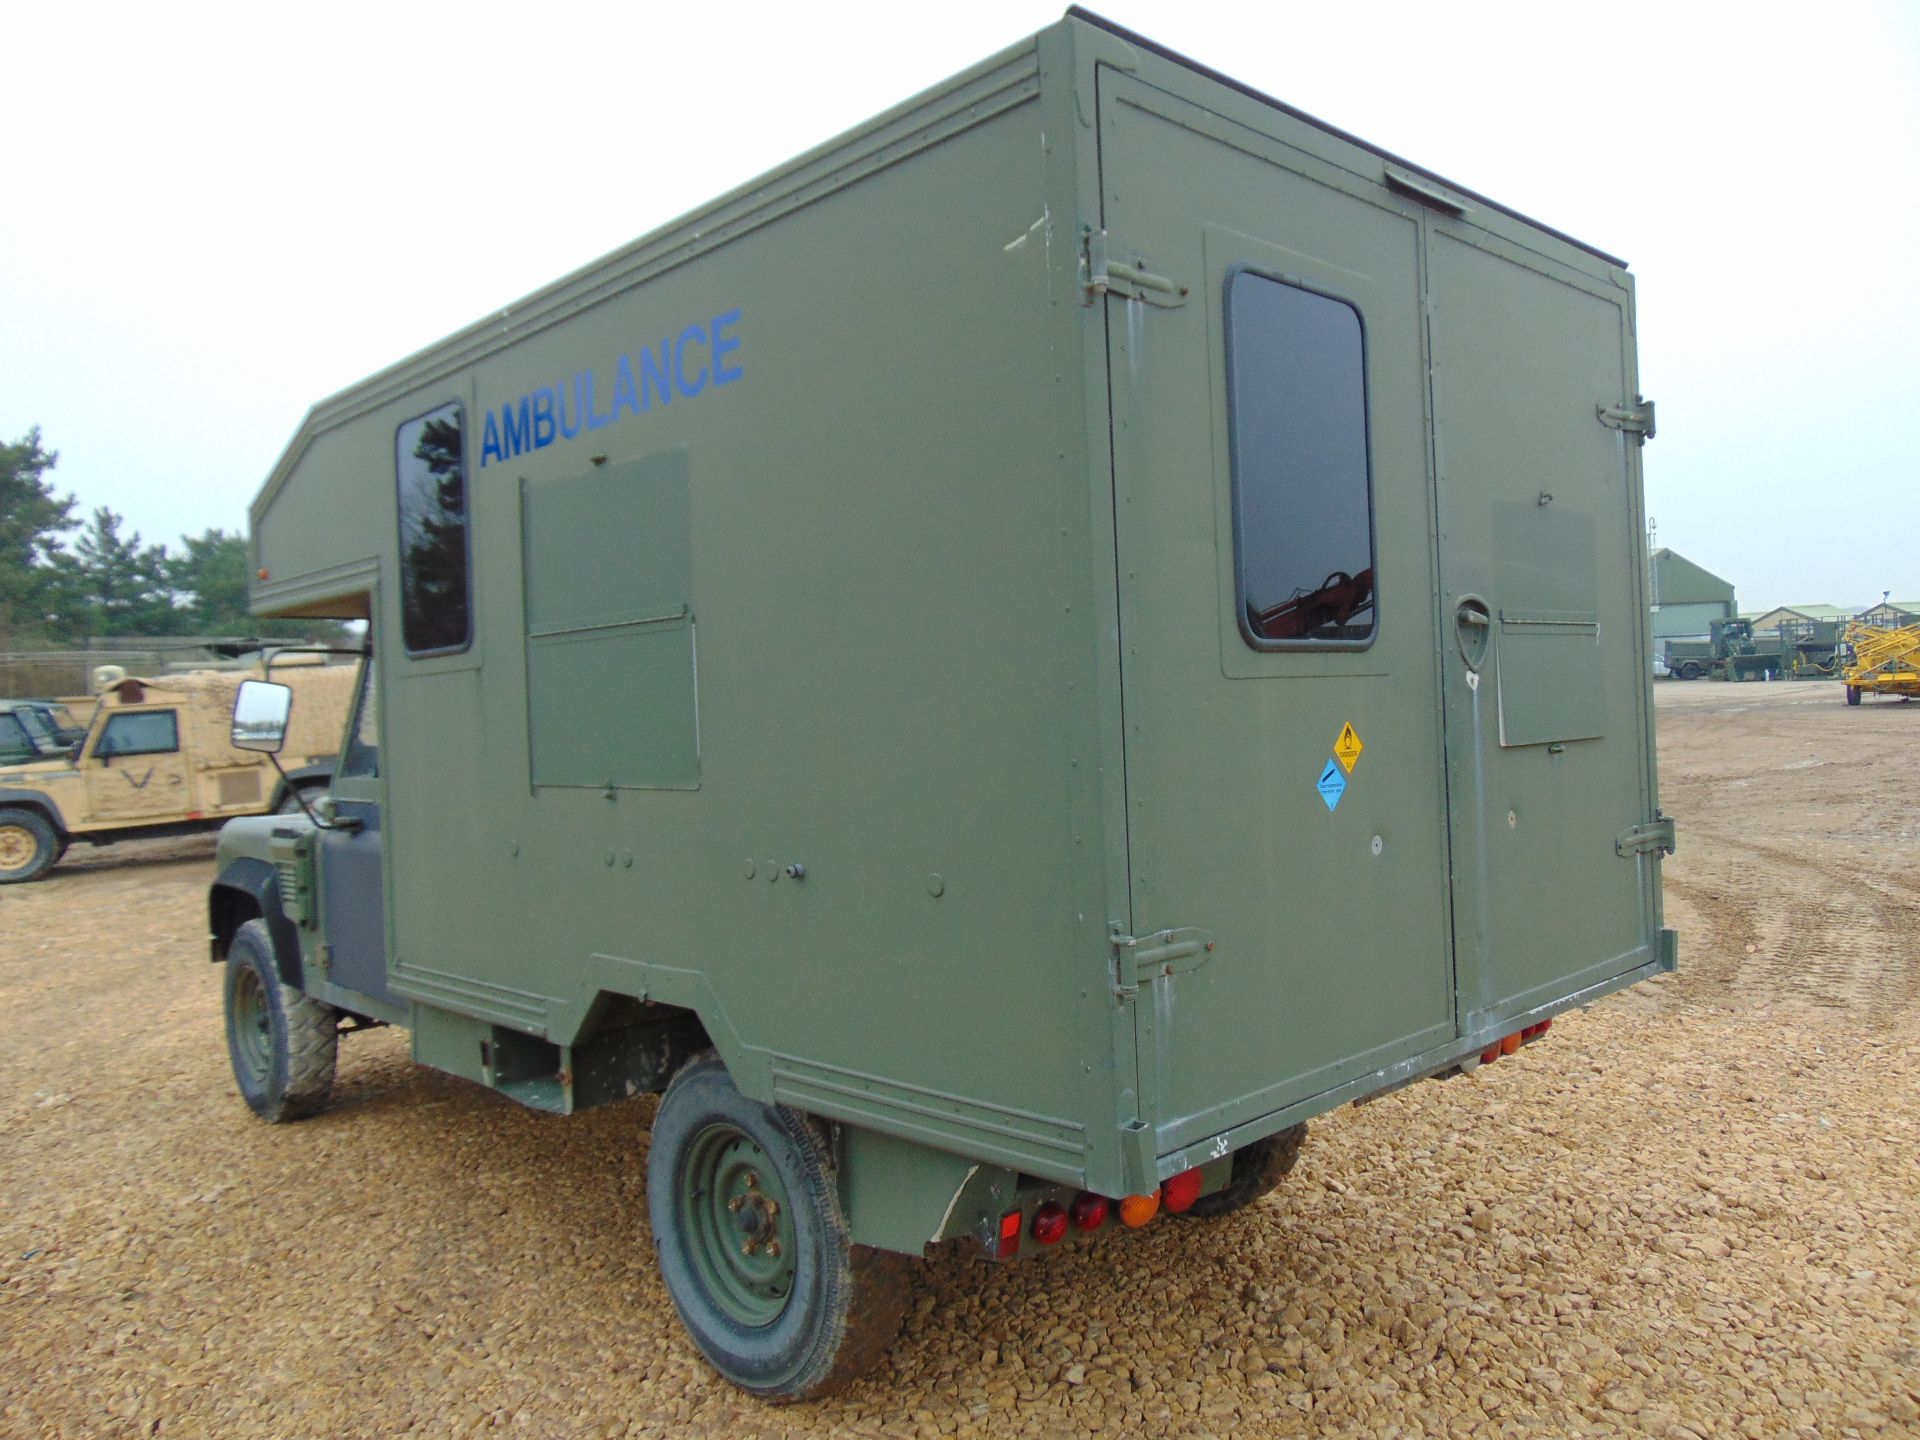 Military Specification Land Rover Wolf 130 ambulance - Image 8 of 19